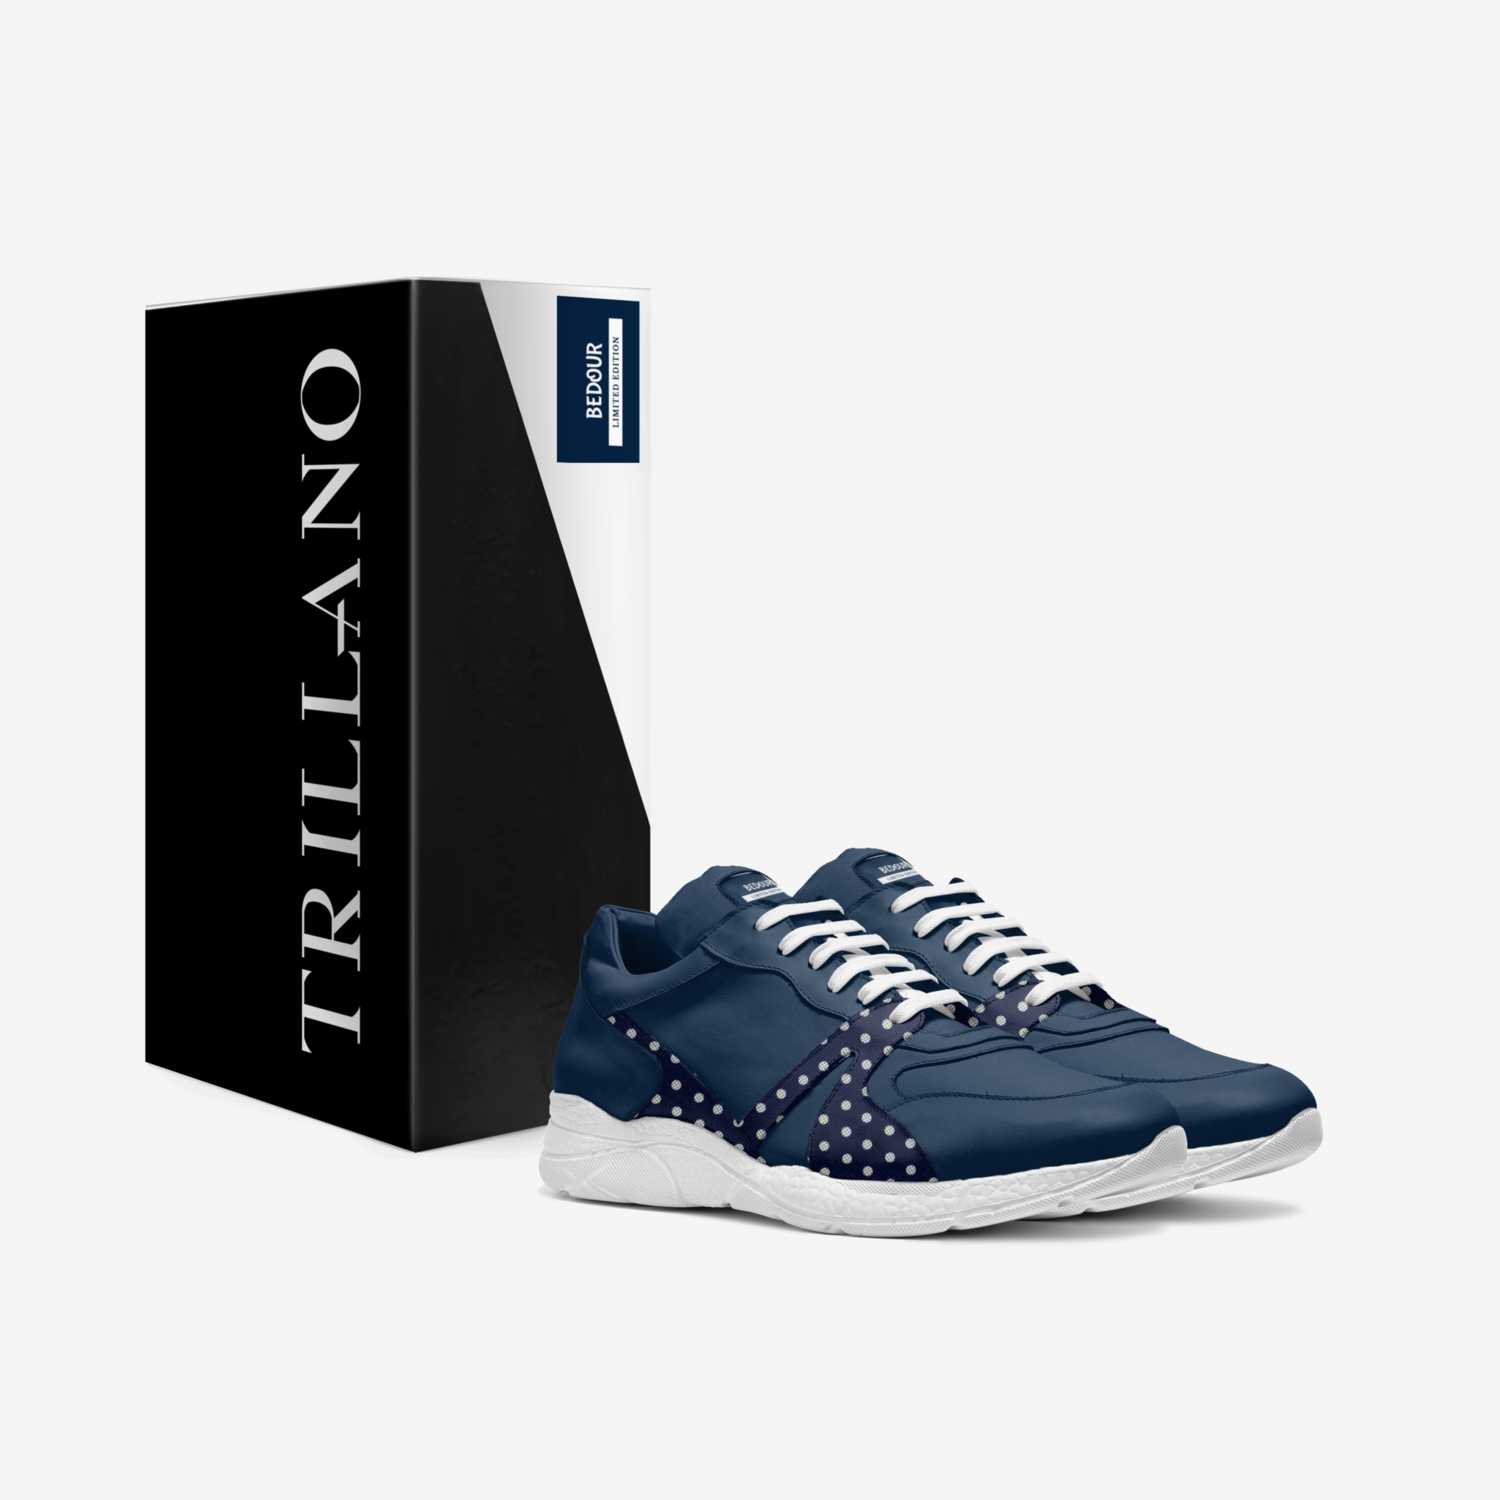 BEDOUR custom made in Italy shoes by Trillano Adisa | Box view